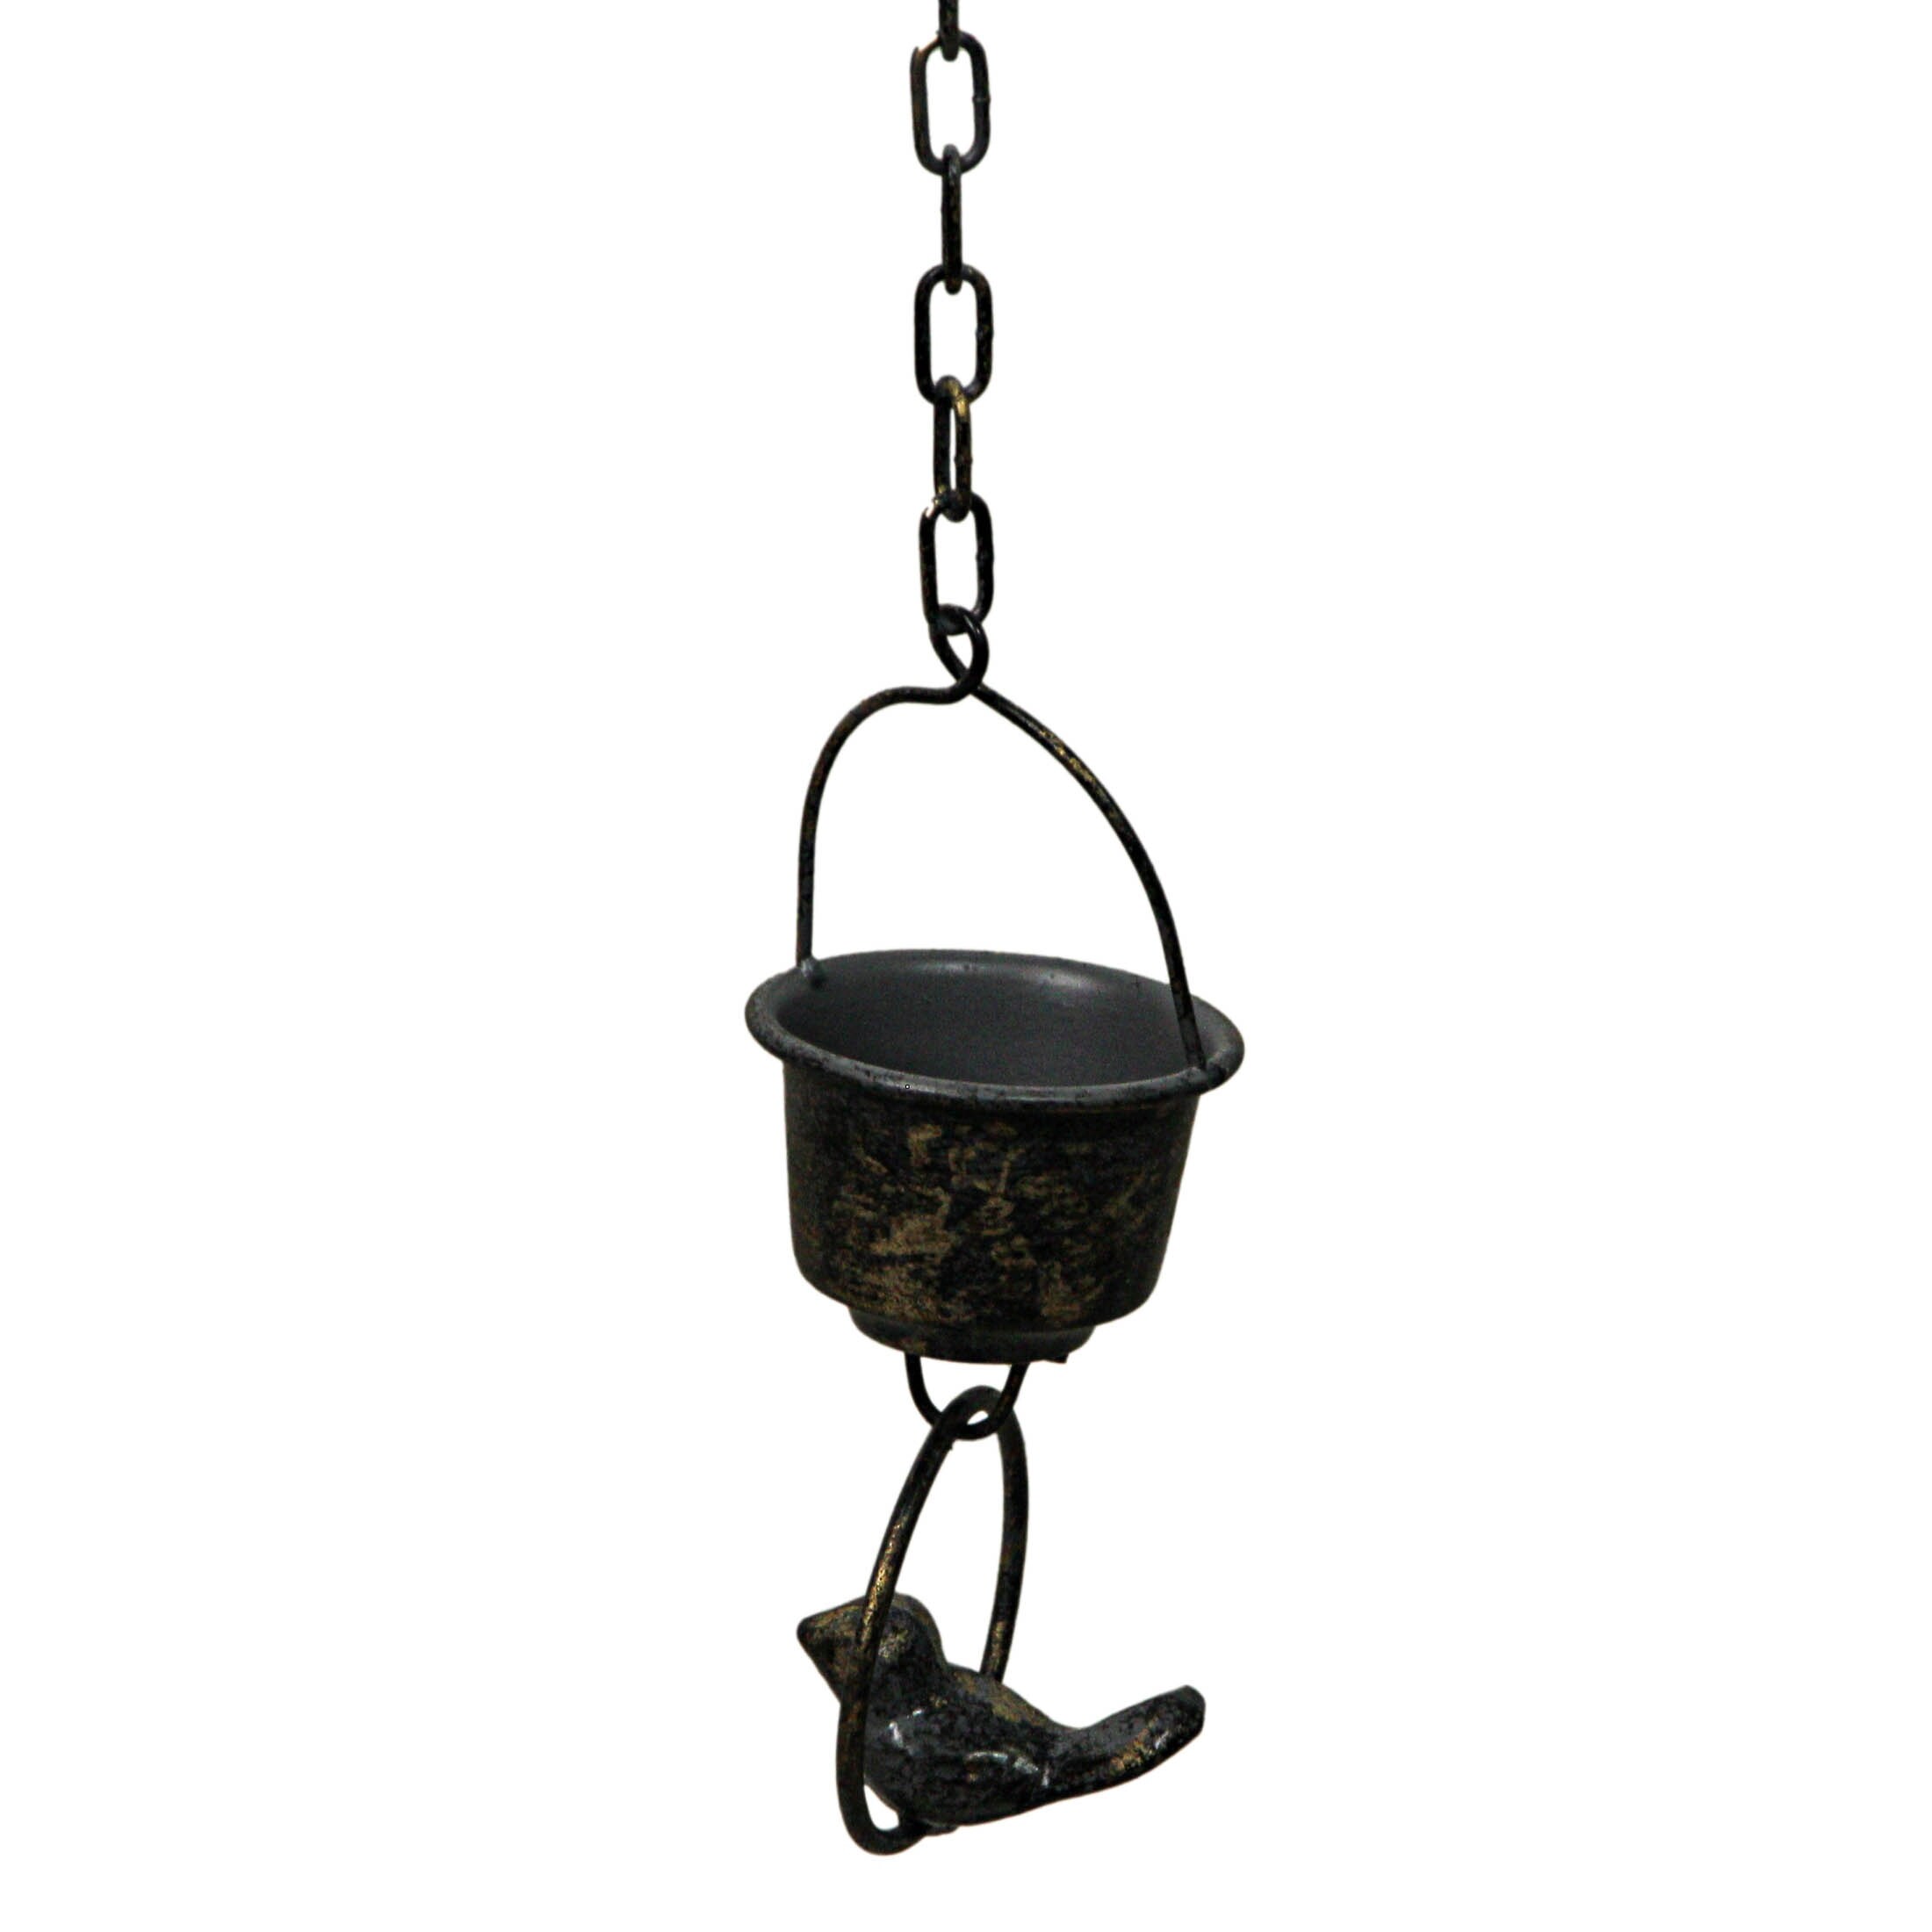 75 Inch Metal Cup  Bird Gutter Downspout Rain Chain Outdoor Decor On  Sale Bed Bath  Beyond 37560144